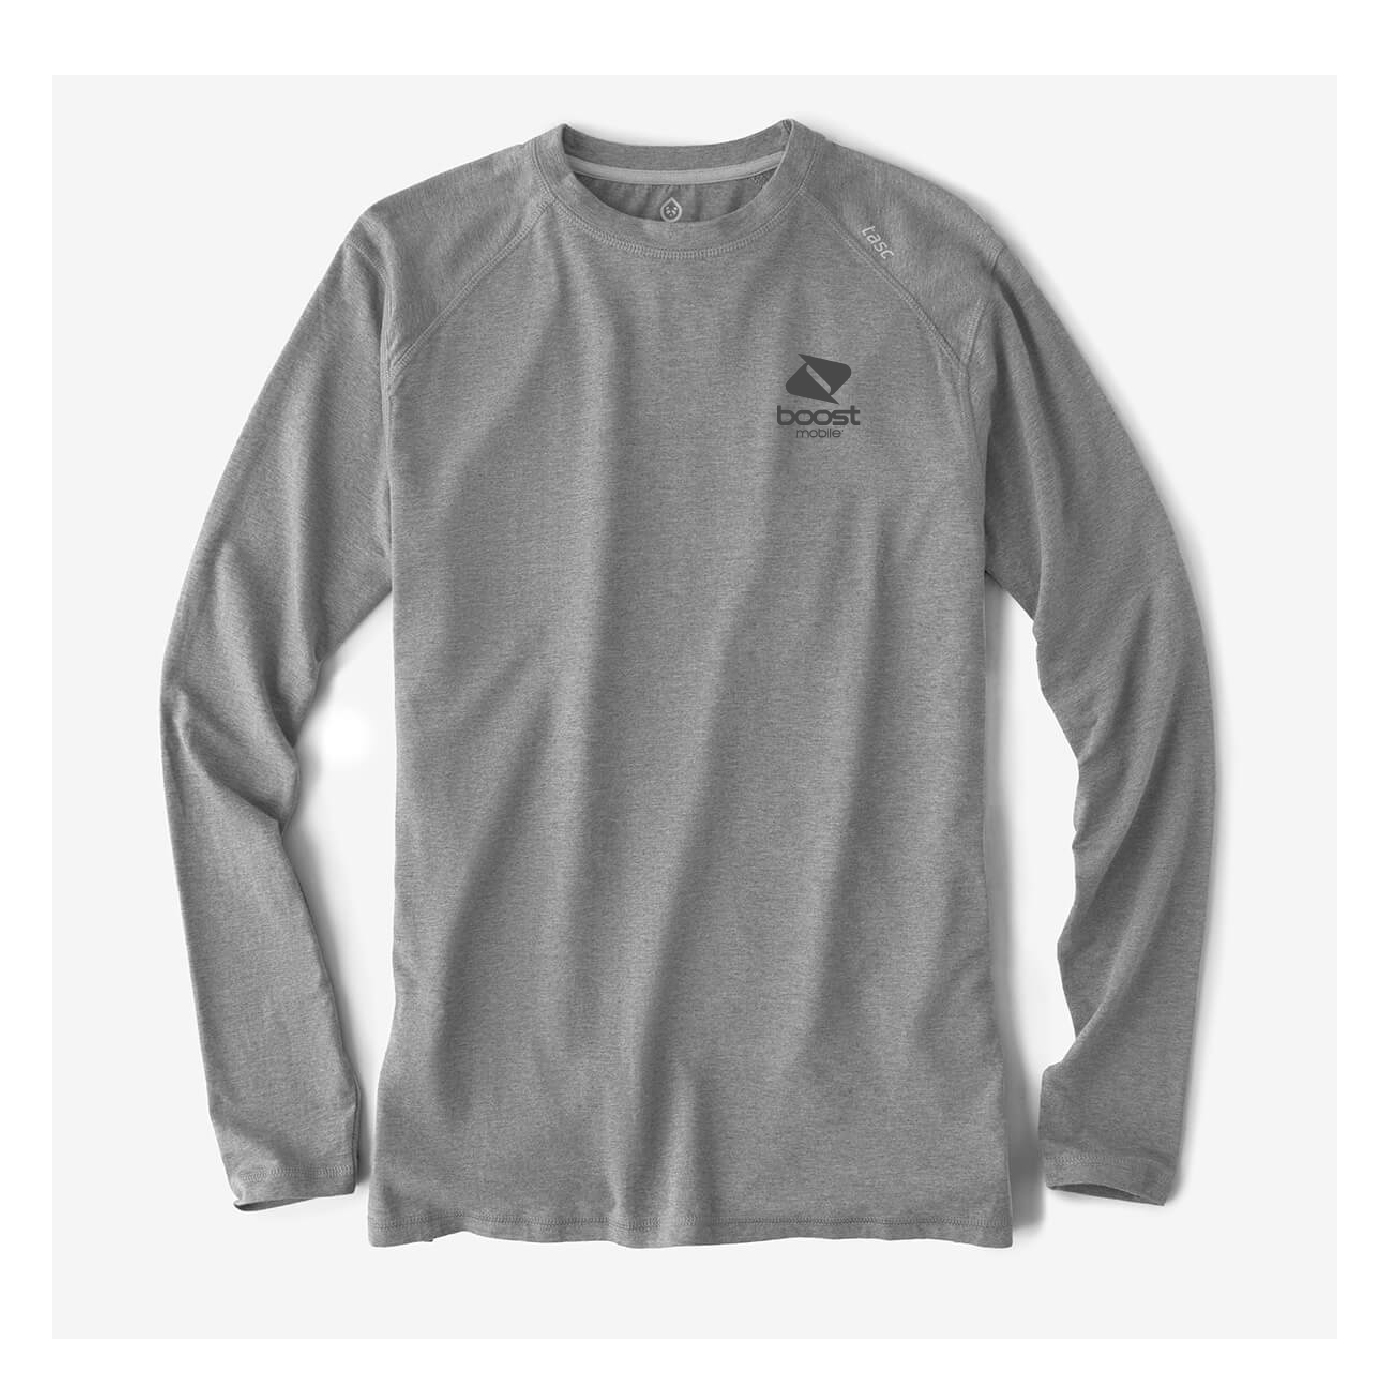 Boost, Tasc Performance Long Sleeve Fitness Shirt with Boost Logo